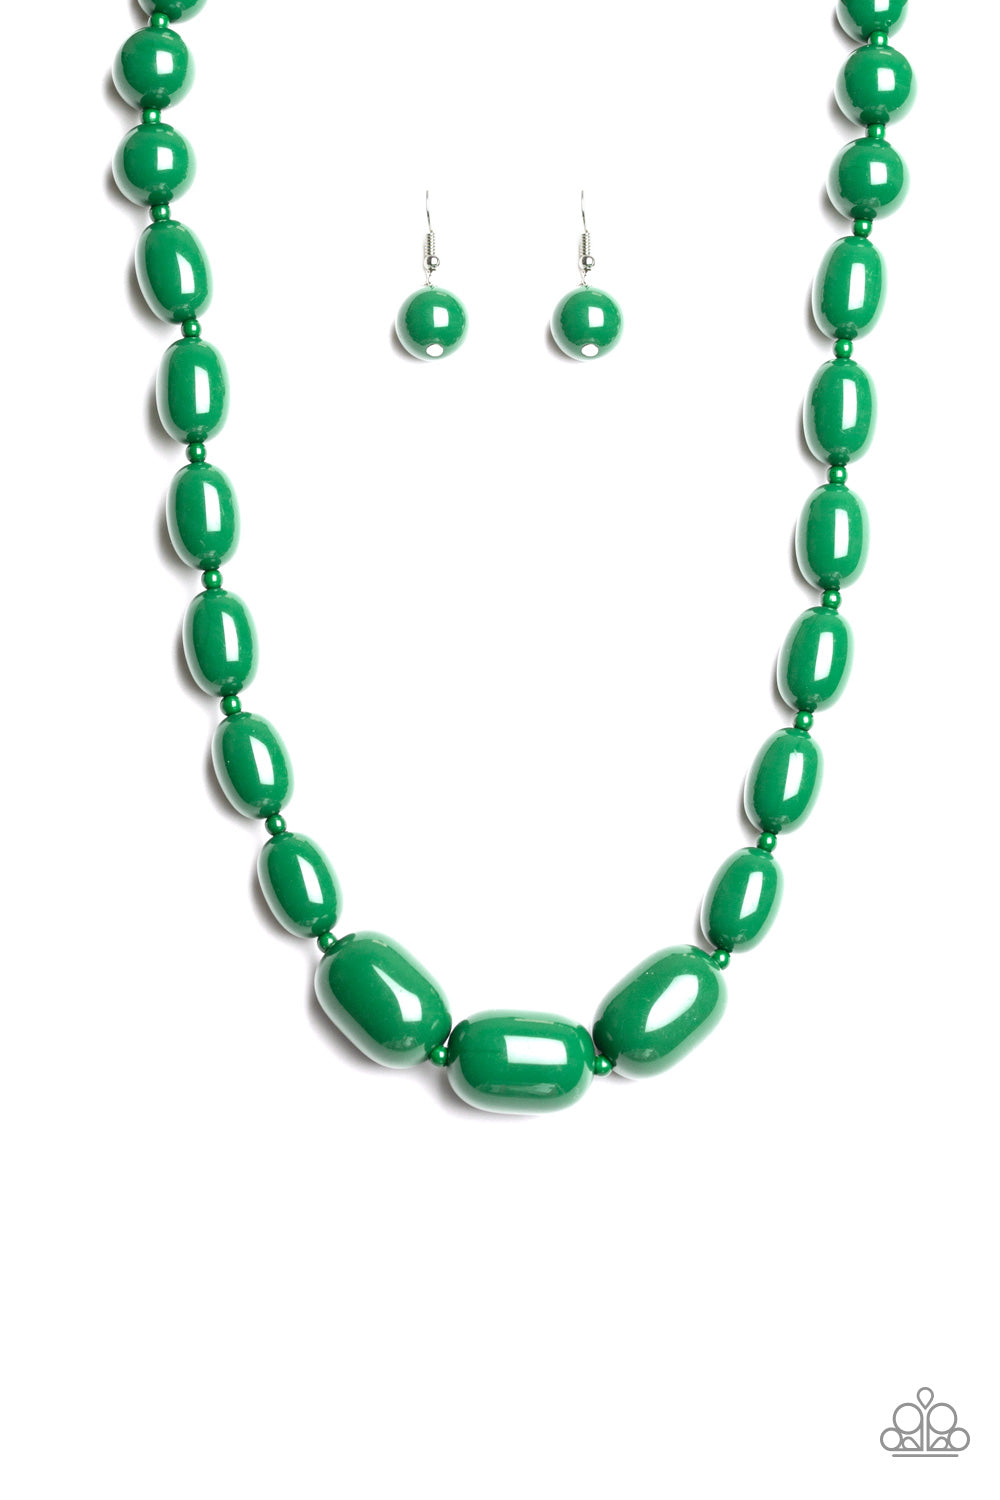 Poppin Popularity - Green Necklace